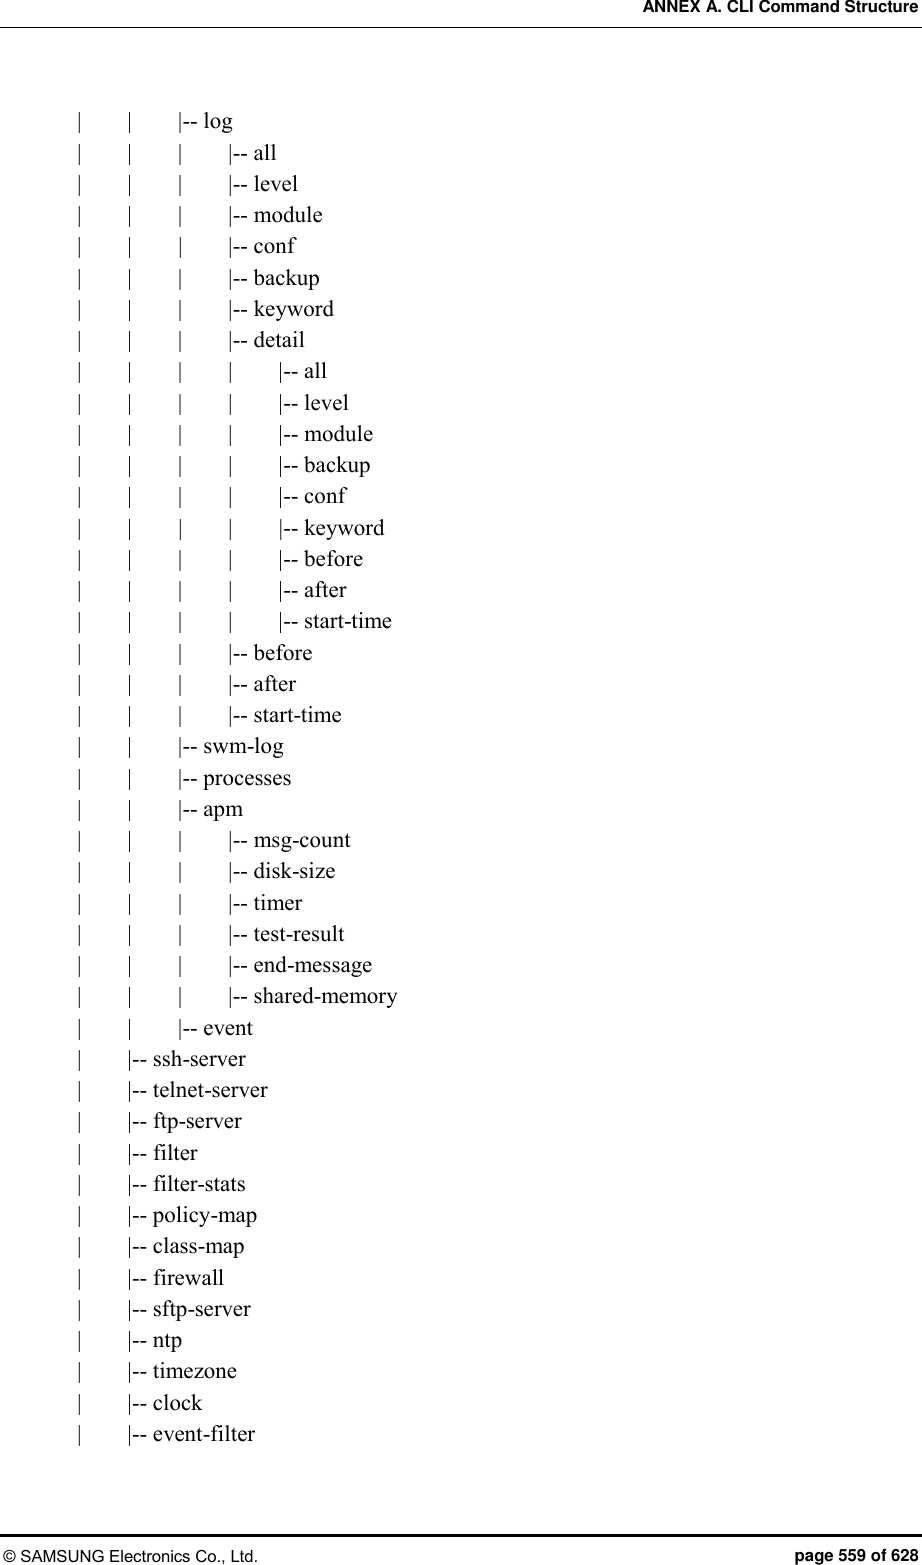 ANNEX A. CLI Command Structure © SAMSUNG Electronics Co., Ltd.  page 559 of 628 |        |        |-- log |        |        |        |-- all |        |        |        |-- level |        |        |        |-- module |        |    |        |-- conf |        |        |        |-- backup |        |        |        |-- keyword |        |        |        |-- detail |        |        |        |        |-- all |        |        |        |        |-- level |        |        |        |        |-- module |        |        |        |        |-- backup |        |        |        |        |-- conf |        |        |        |        |-- keyword |        |        |        |        |-- before |        |        |        |        |-- after |        |        |        |        |-- start-time |        |        |        |-- before |        |        |        |-- after |        |        |        |-- start-time |        |        |-- swm-log |        |        |-- processes |        |        |-- apm |        |        |        |-- msg-count |        |        |        |-- disk-size |        |        |        |-- timer |        |        |        |-- test-result |        |        |        |-- end-message |        |        |        |-- shared-memory |        |        |-- event |        |-- ssh-server |        |-- telnet-server |        |-- ftp-server |        |-- filter |        |-- filter-stats |        |-- policy-map |        |-- class-map |        |-- firewall |        |-- sftp-server |        |-- ntp |        |-- timezone |        |-- clock |        |-- event-filter 